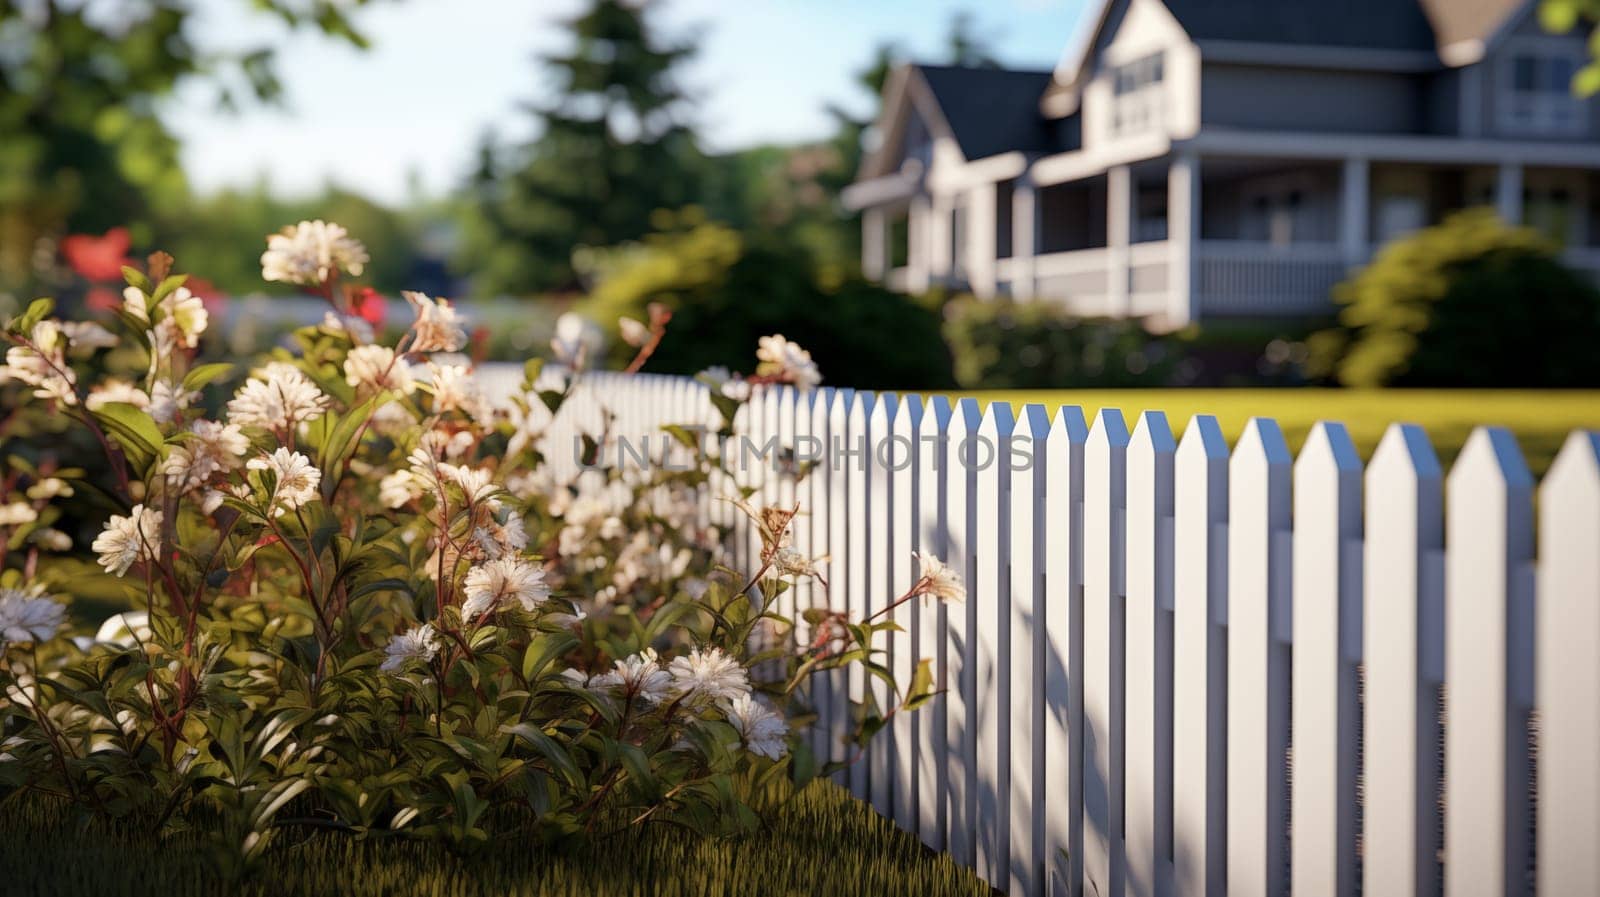 Cozy suburban home with a classic white picket fence and flowerbeds under the shade of mature trees.